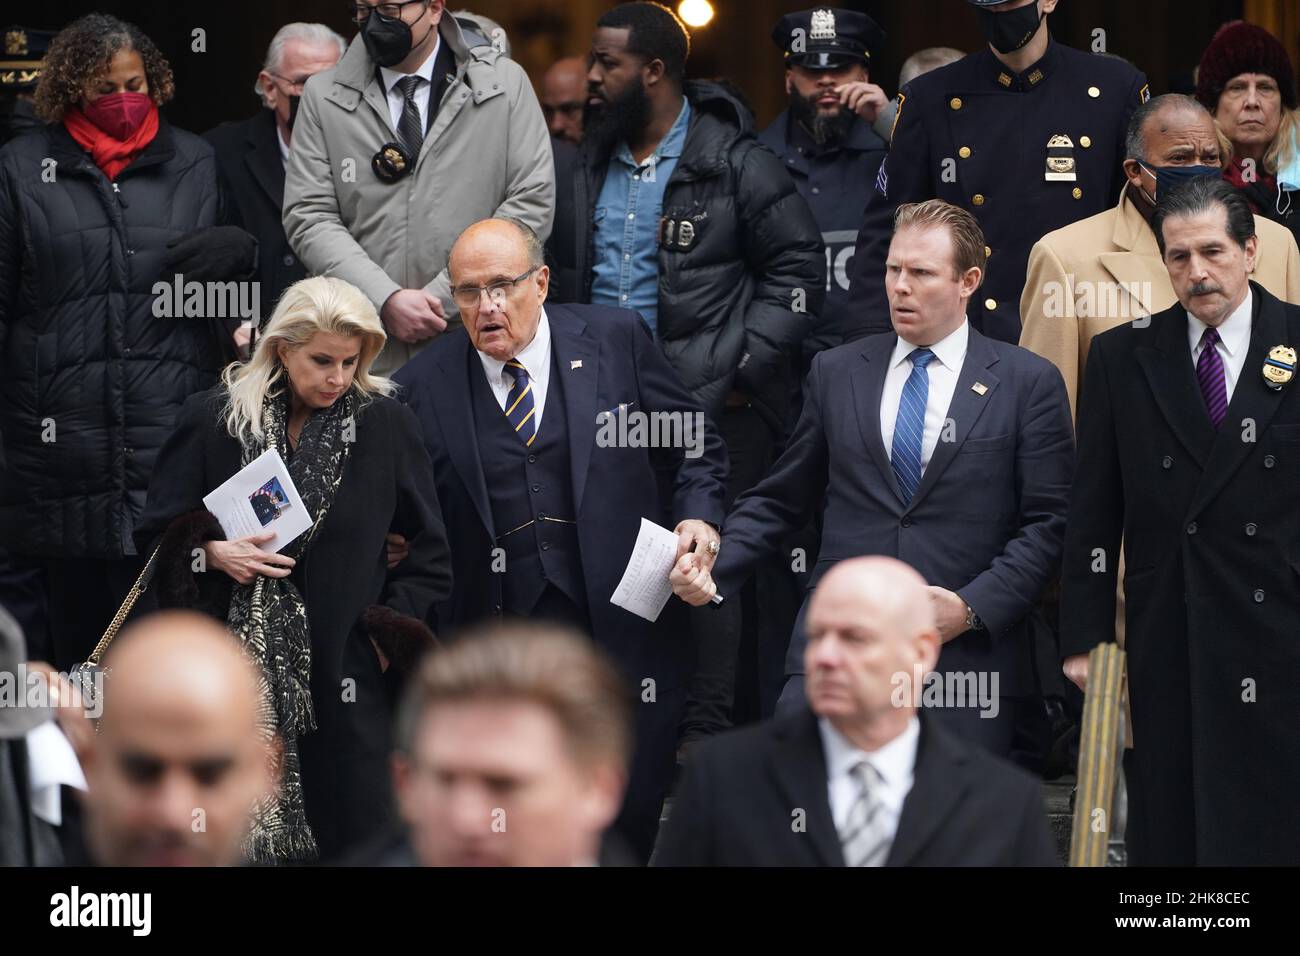 New York, United States. 01st Feb, 2022. Rudy Giuliani and his son Andrew exit St. Patrick's Cathedral at the funeral of NYPD Officer Wilbert Mora.For the second time in less than a week, mourners across New York City and the country came together to bid a final farewell to a fallen NYPD officer. Family, friends and a sea of brothers and sisters in blue gathered for the funeral for Officer Wilbert Mora at St. Patrick's Cathedral in Midtown Manhattan, with burial following in Woodside, Queens. (Photo by Catherine Nance/SOPA Images/Sipa USA) Credit: Sipa USA/Alamy Live News Stock Photo